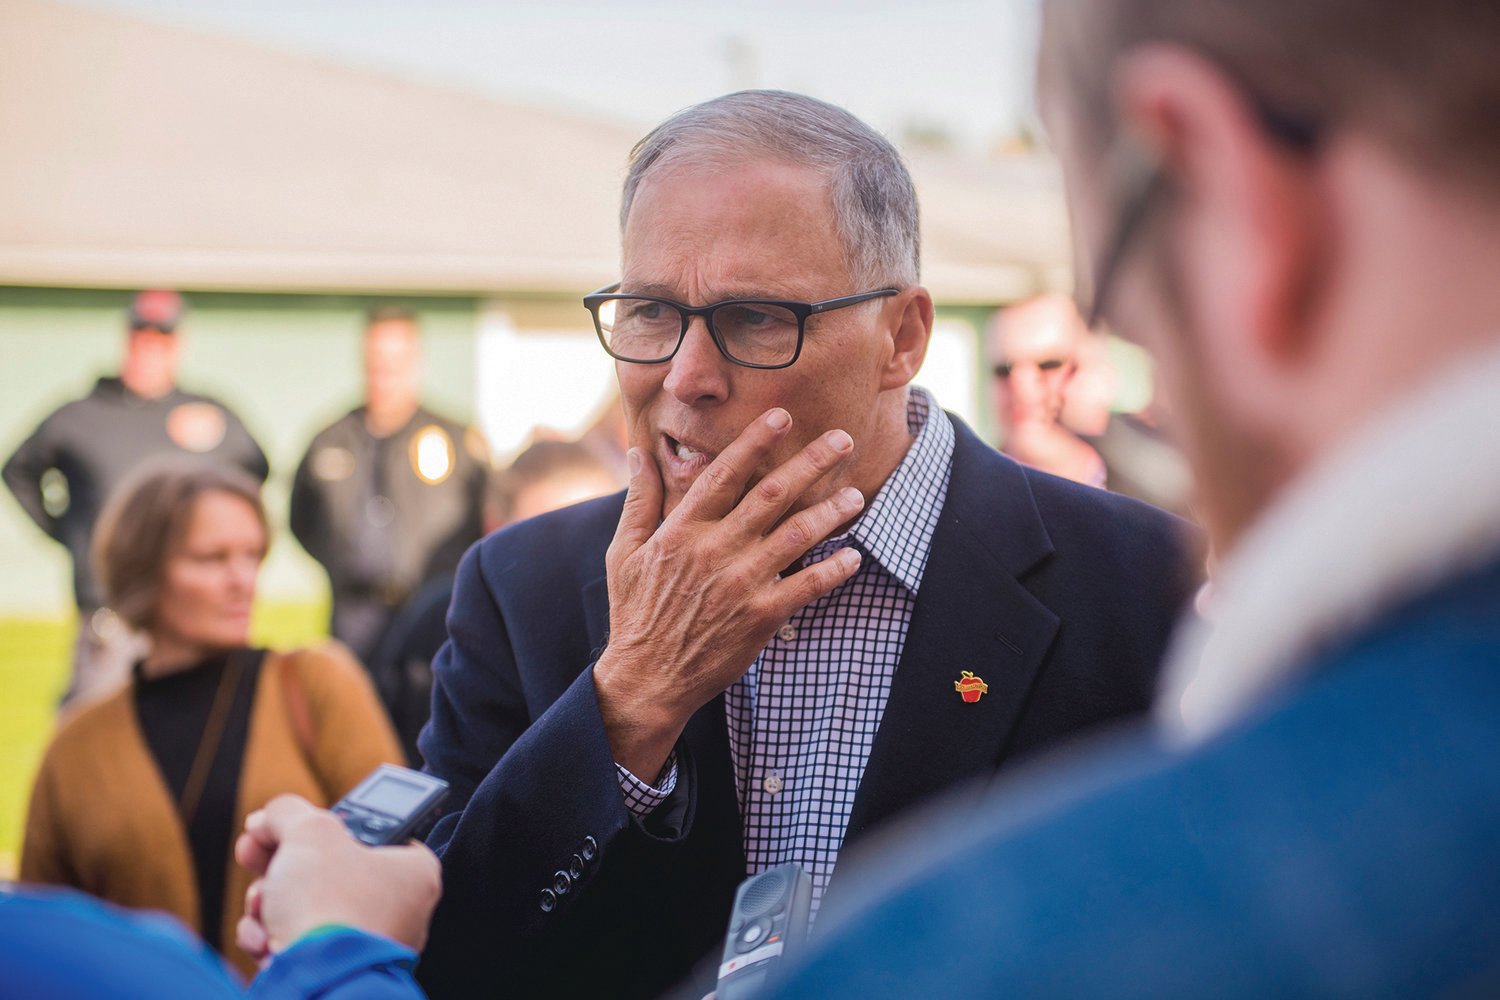 Governor Jay Inslee talks during a press conference at the Southwest Washington Fairgrounds in Chehalis in November 2019.